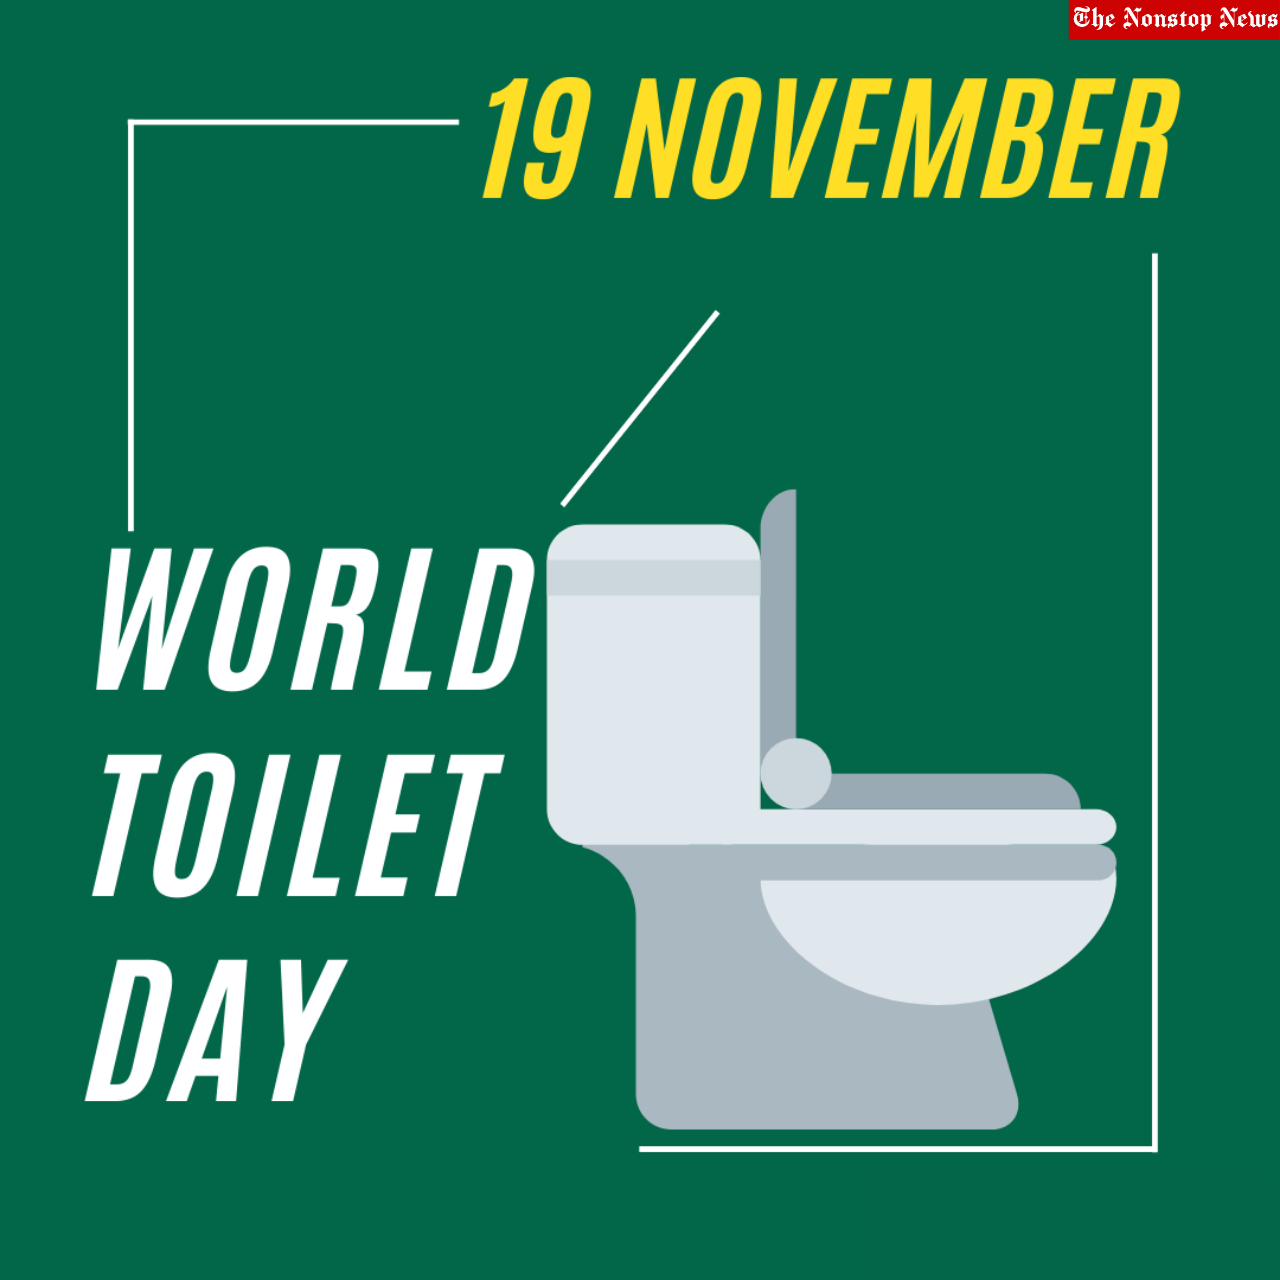 World Toilet Day 2021 Quotes, HD Images, Messages, Slogans, and Poster to Share